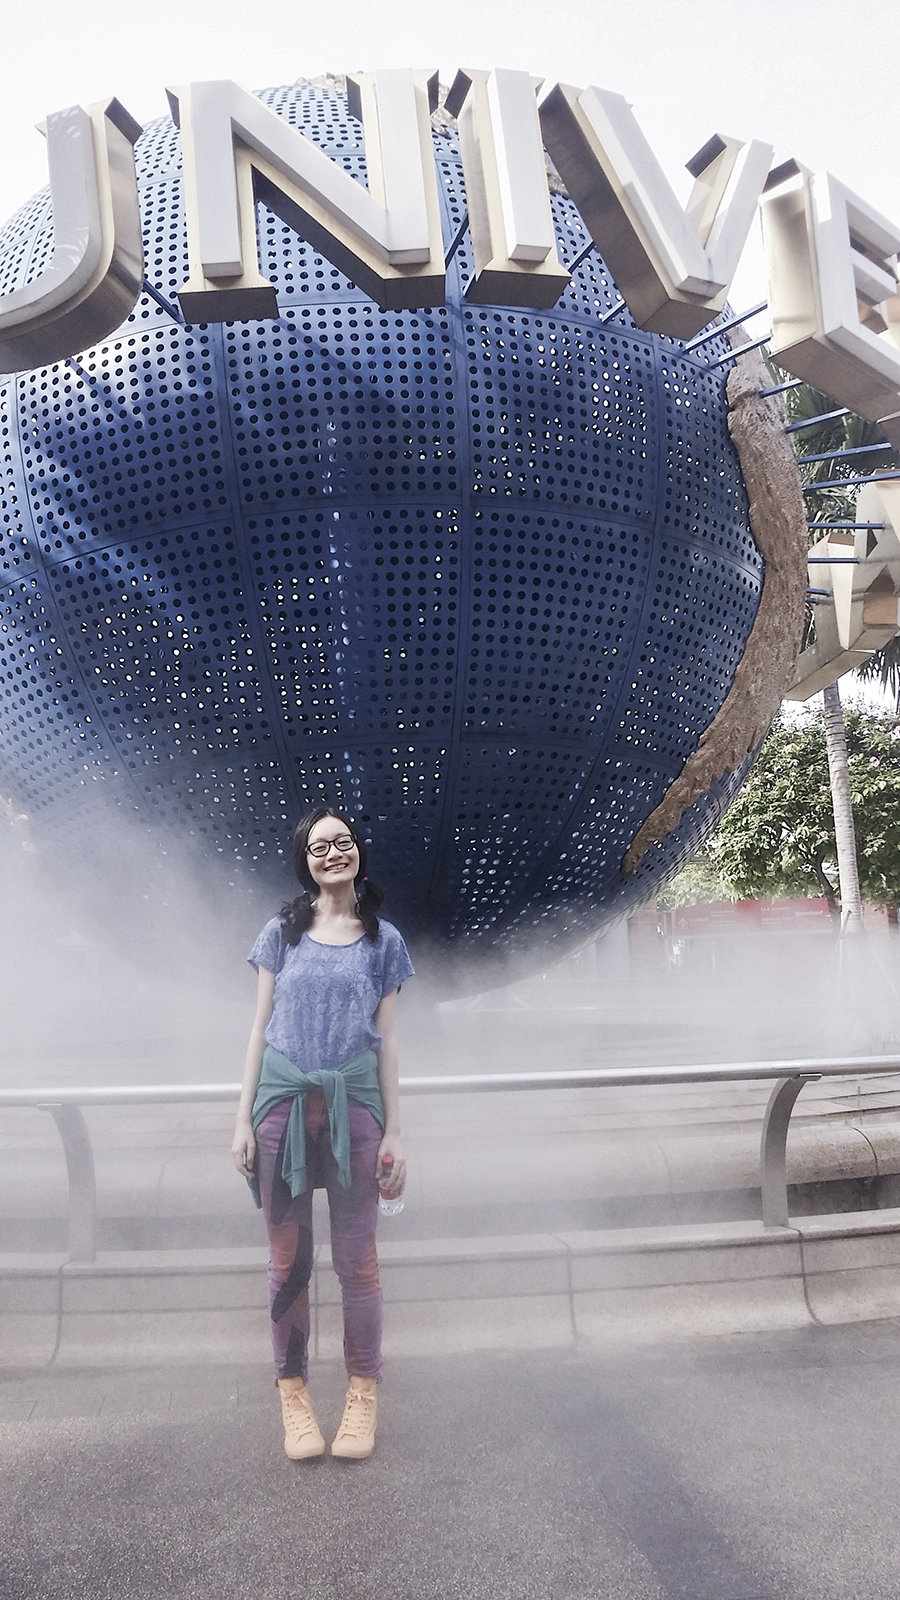 Posing in front of the globe at Universal Studios Singapore.